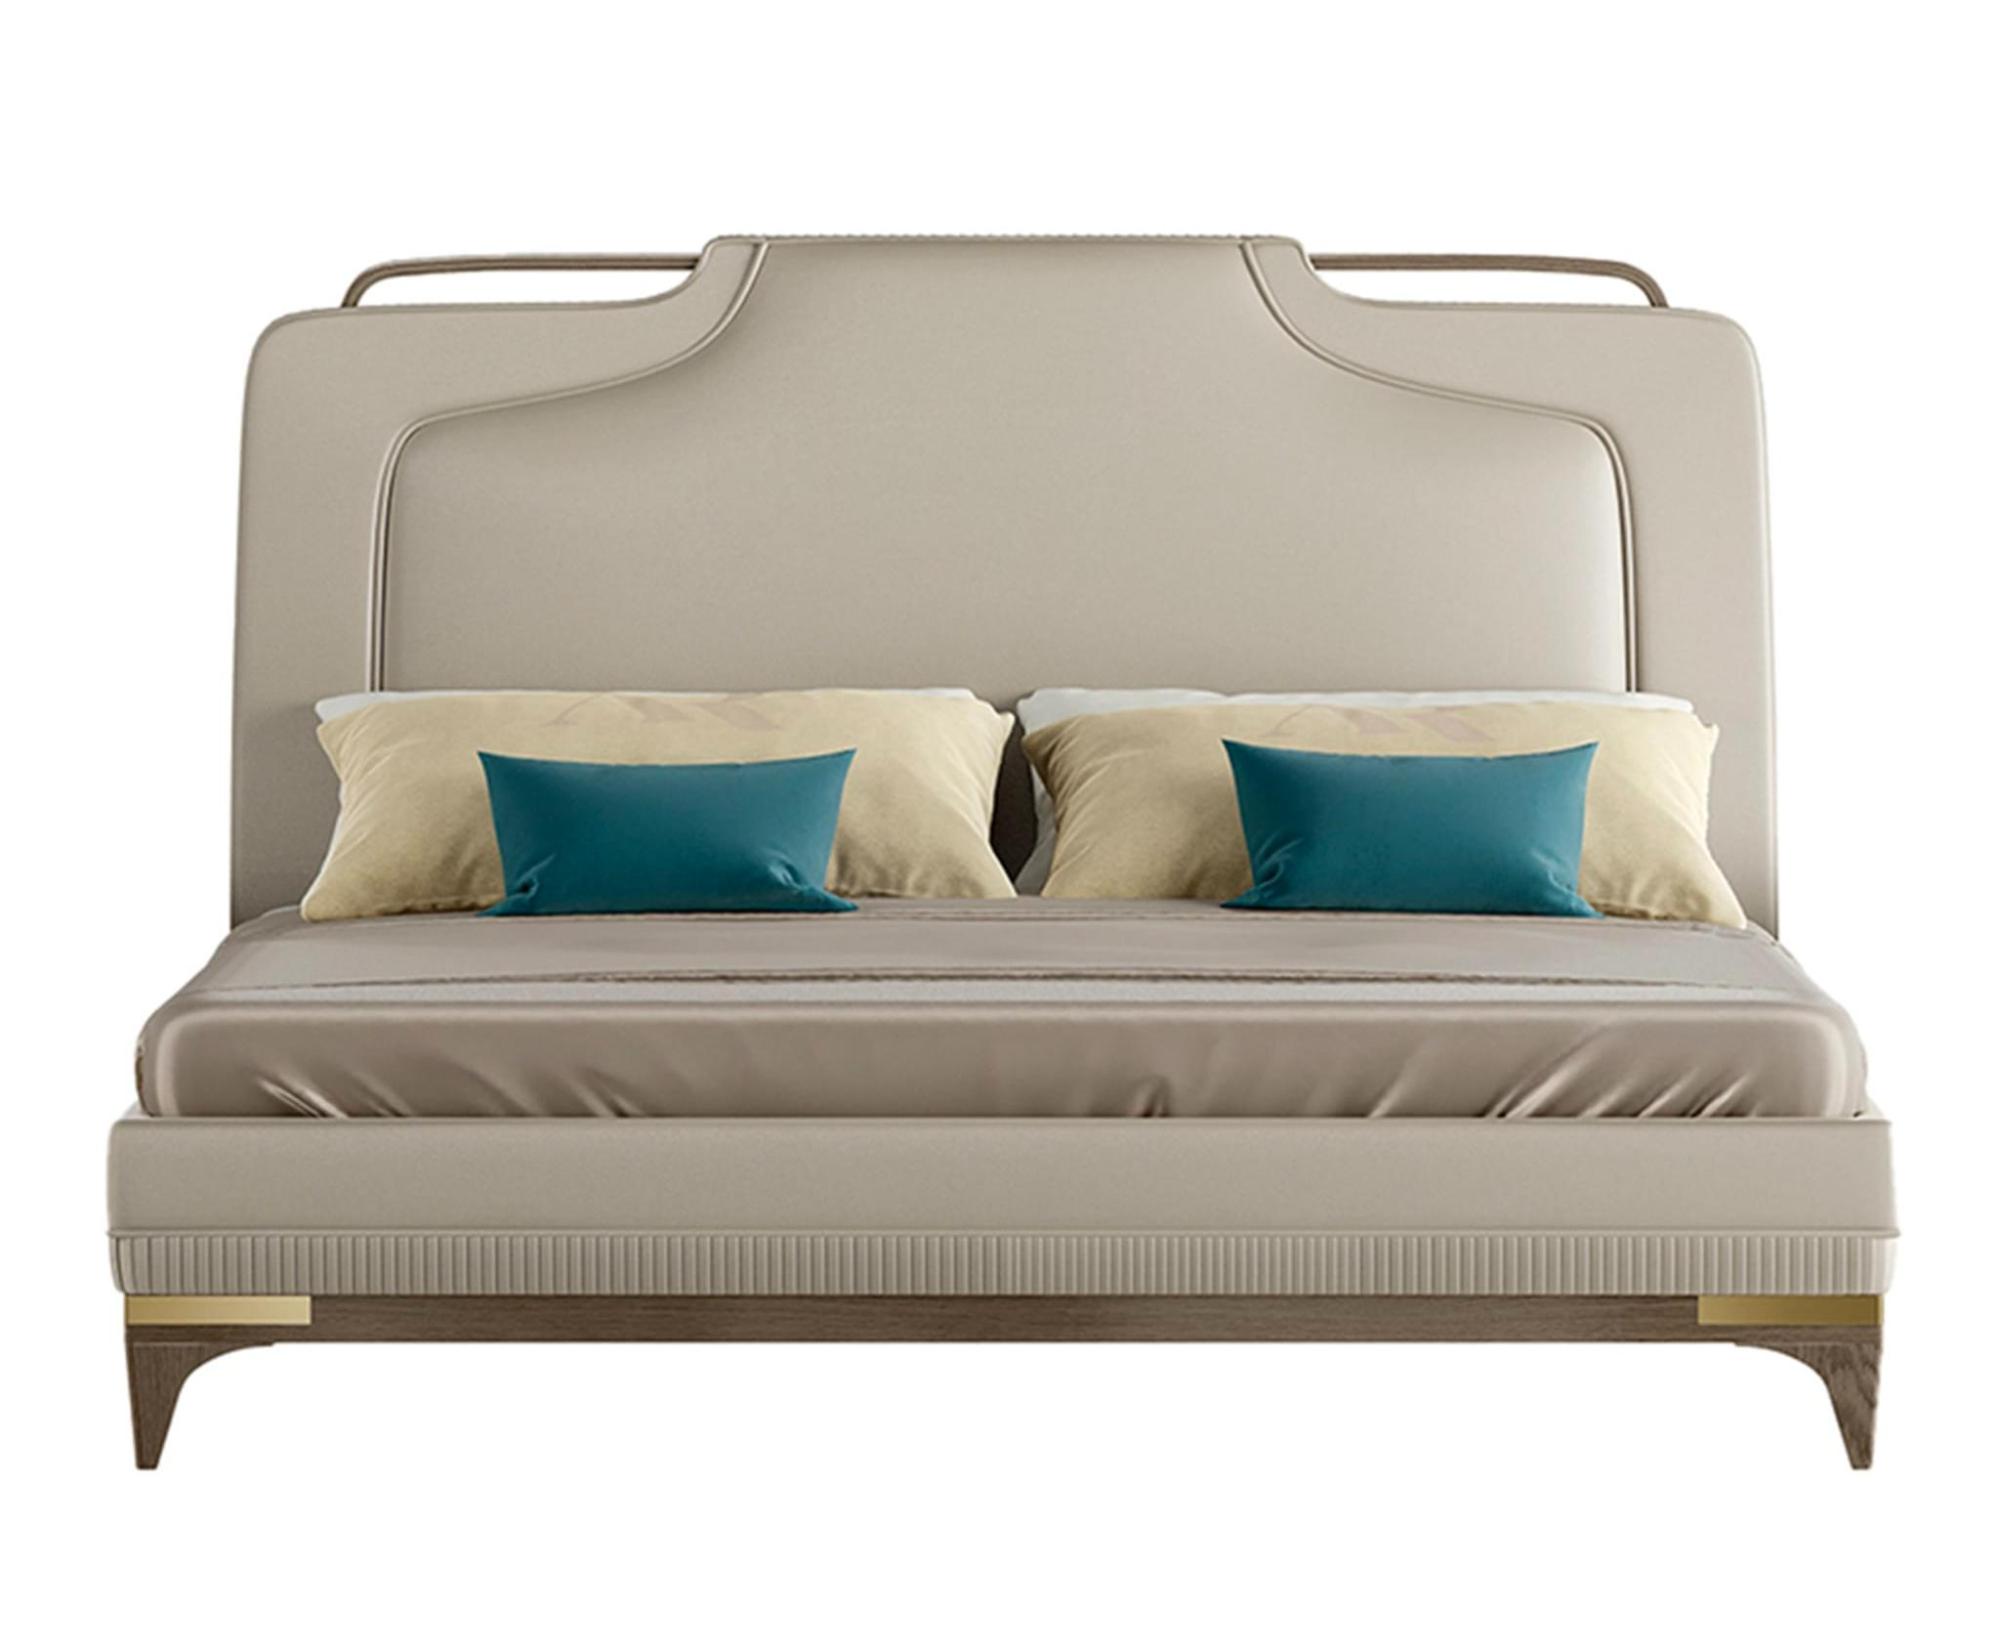 Beige Leather Luxury Bed